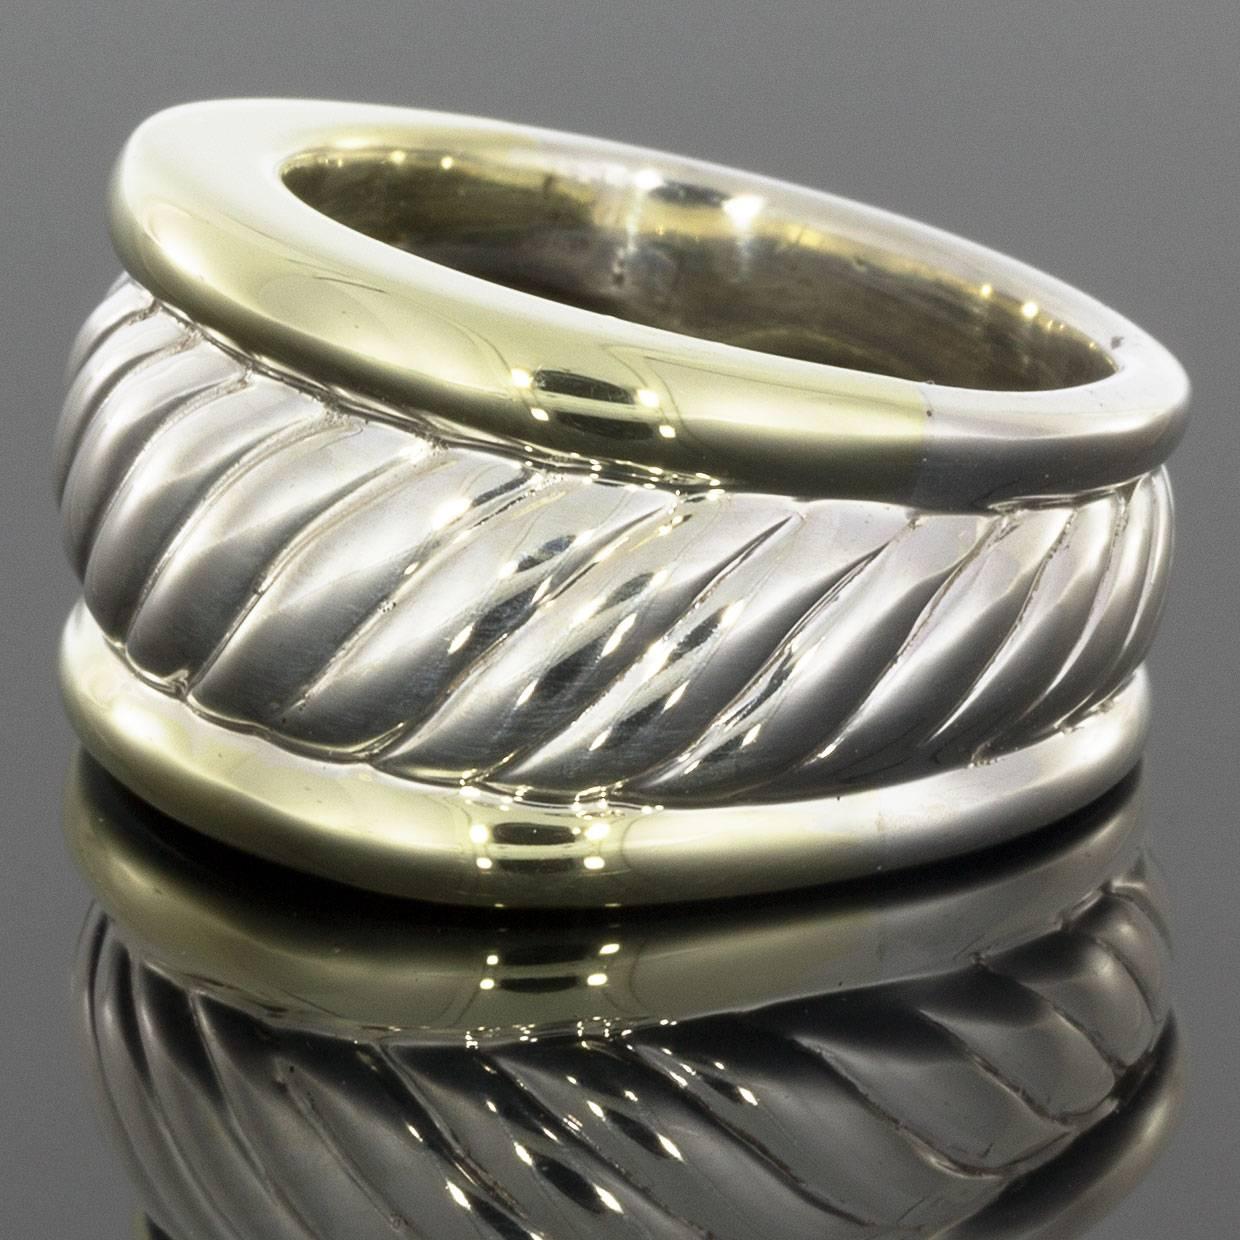 This beautiful David Yurman ring is from the Cable Classics Collection and features David Yurman's iconic cable design. The ring is made of sterling silver and 14 karat yellow gold with a high polished finish. This ring is a 6.5 and and 12 mm wide.